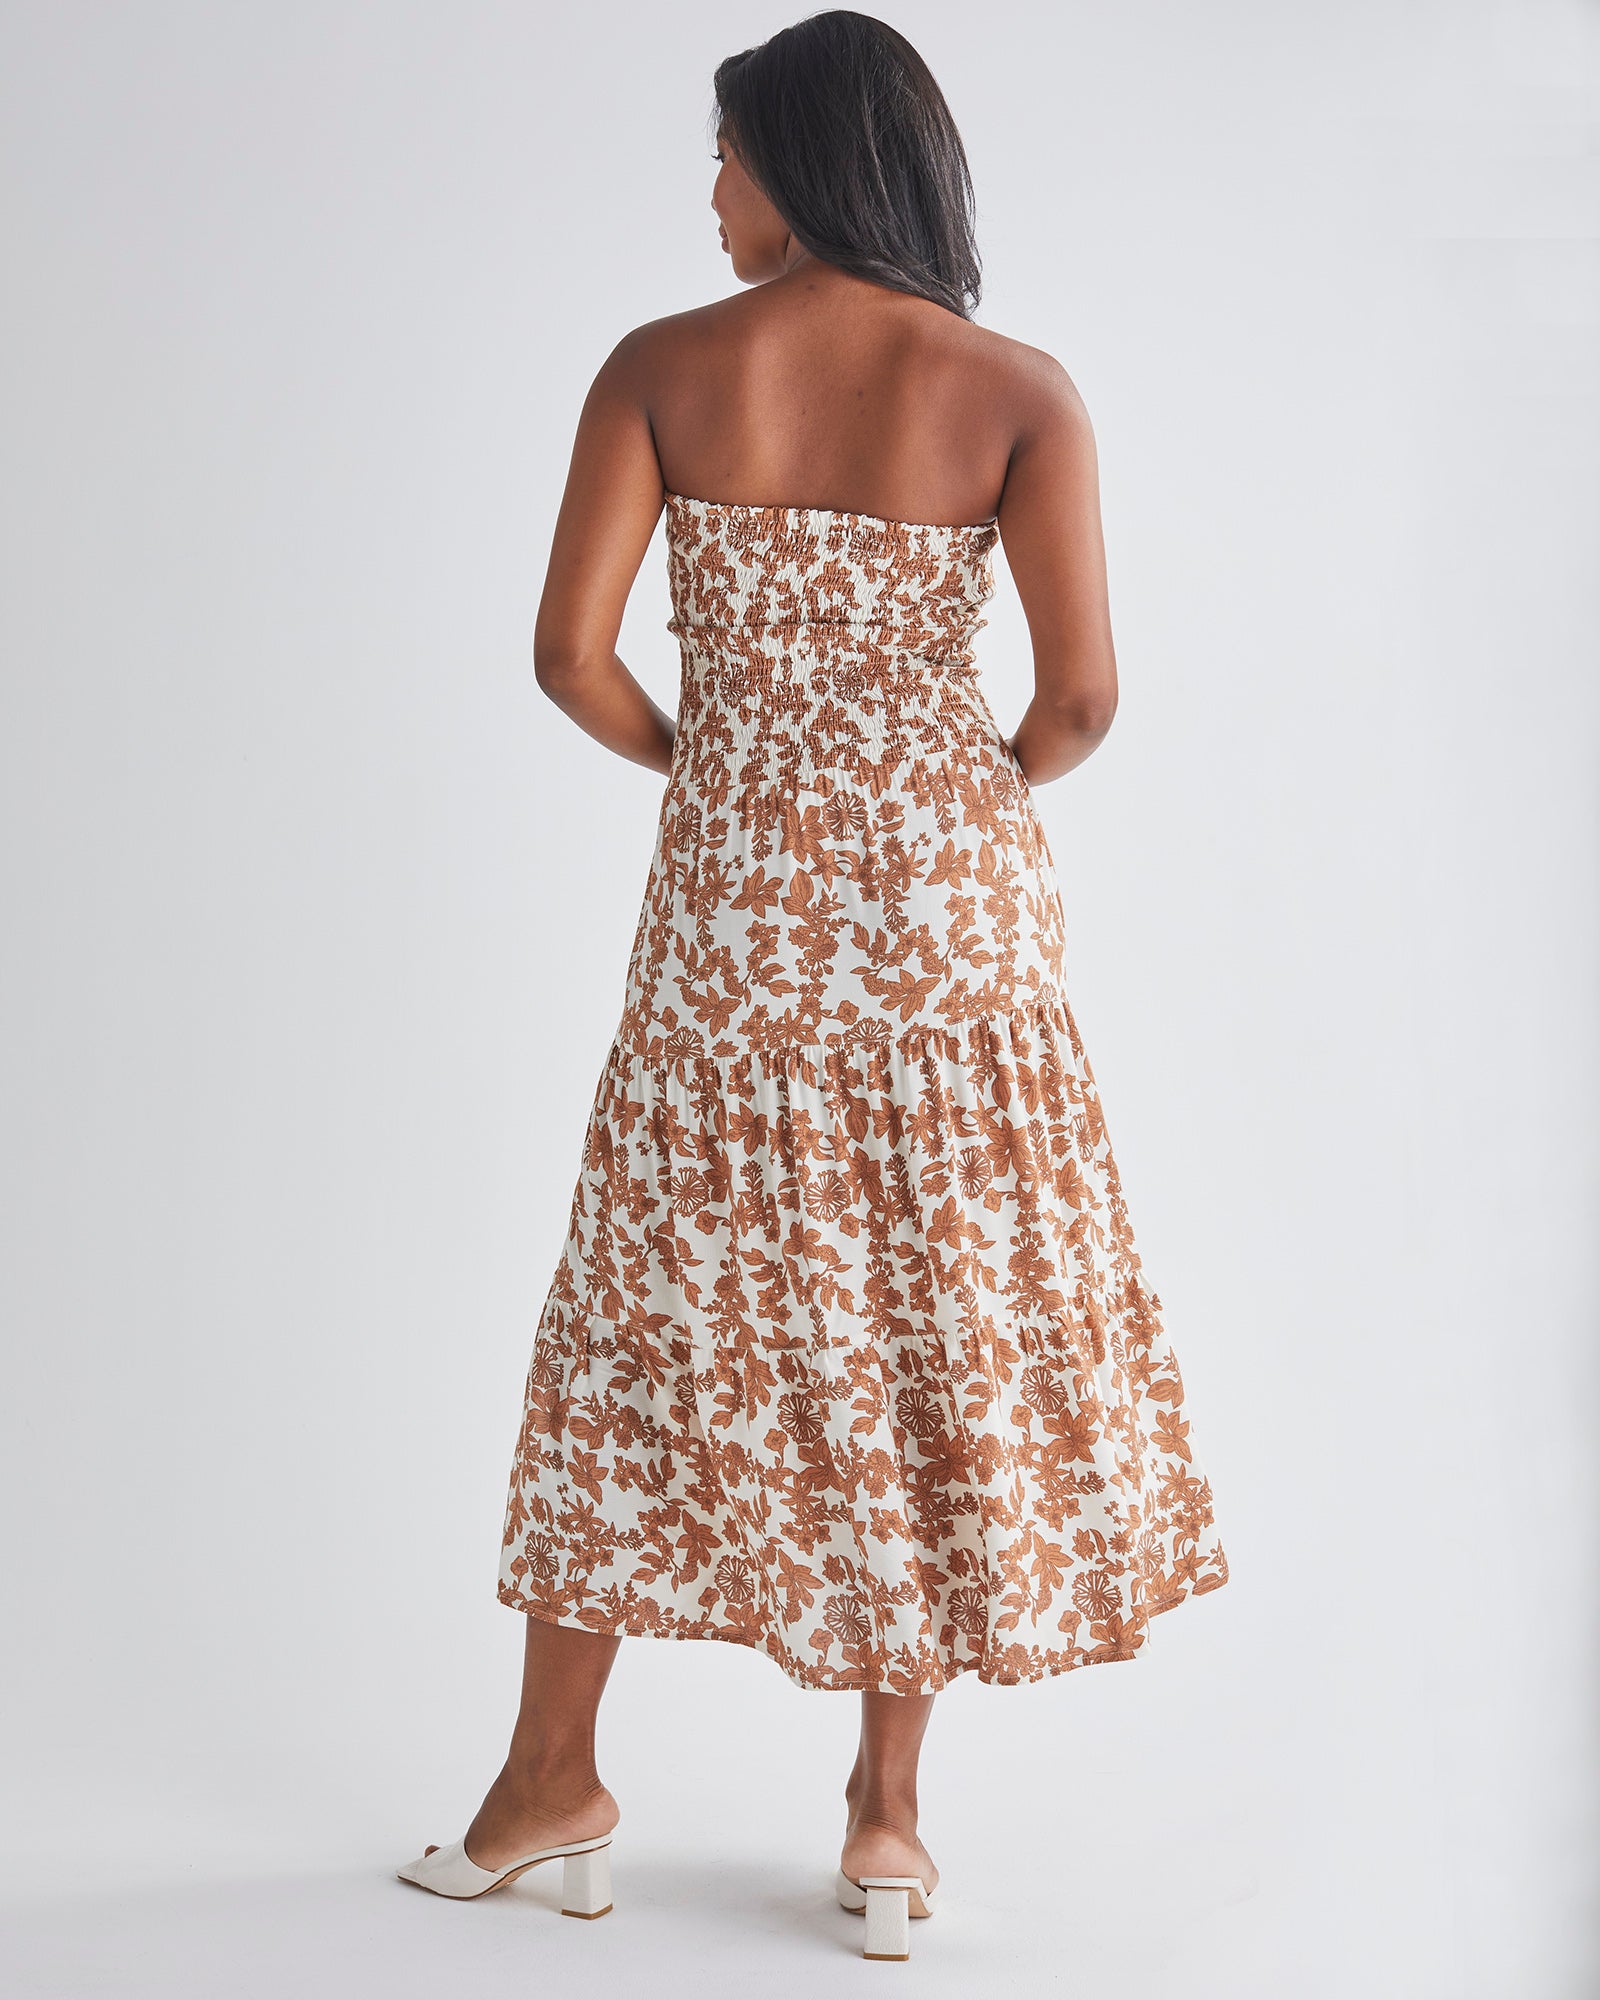 Back view-Long skirt &amp; Strapless dress&nbsp; Shirred elastic waist band Casual, work or day-to-night wear Colour: Brown Floral Print from AngelMaternity